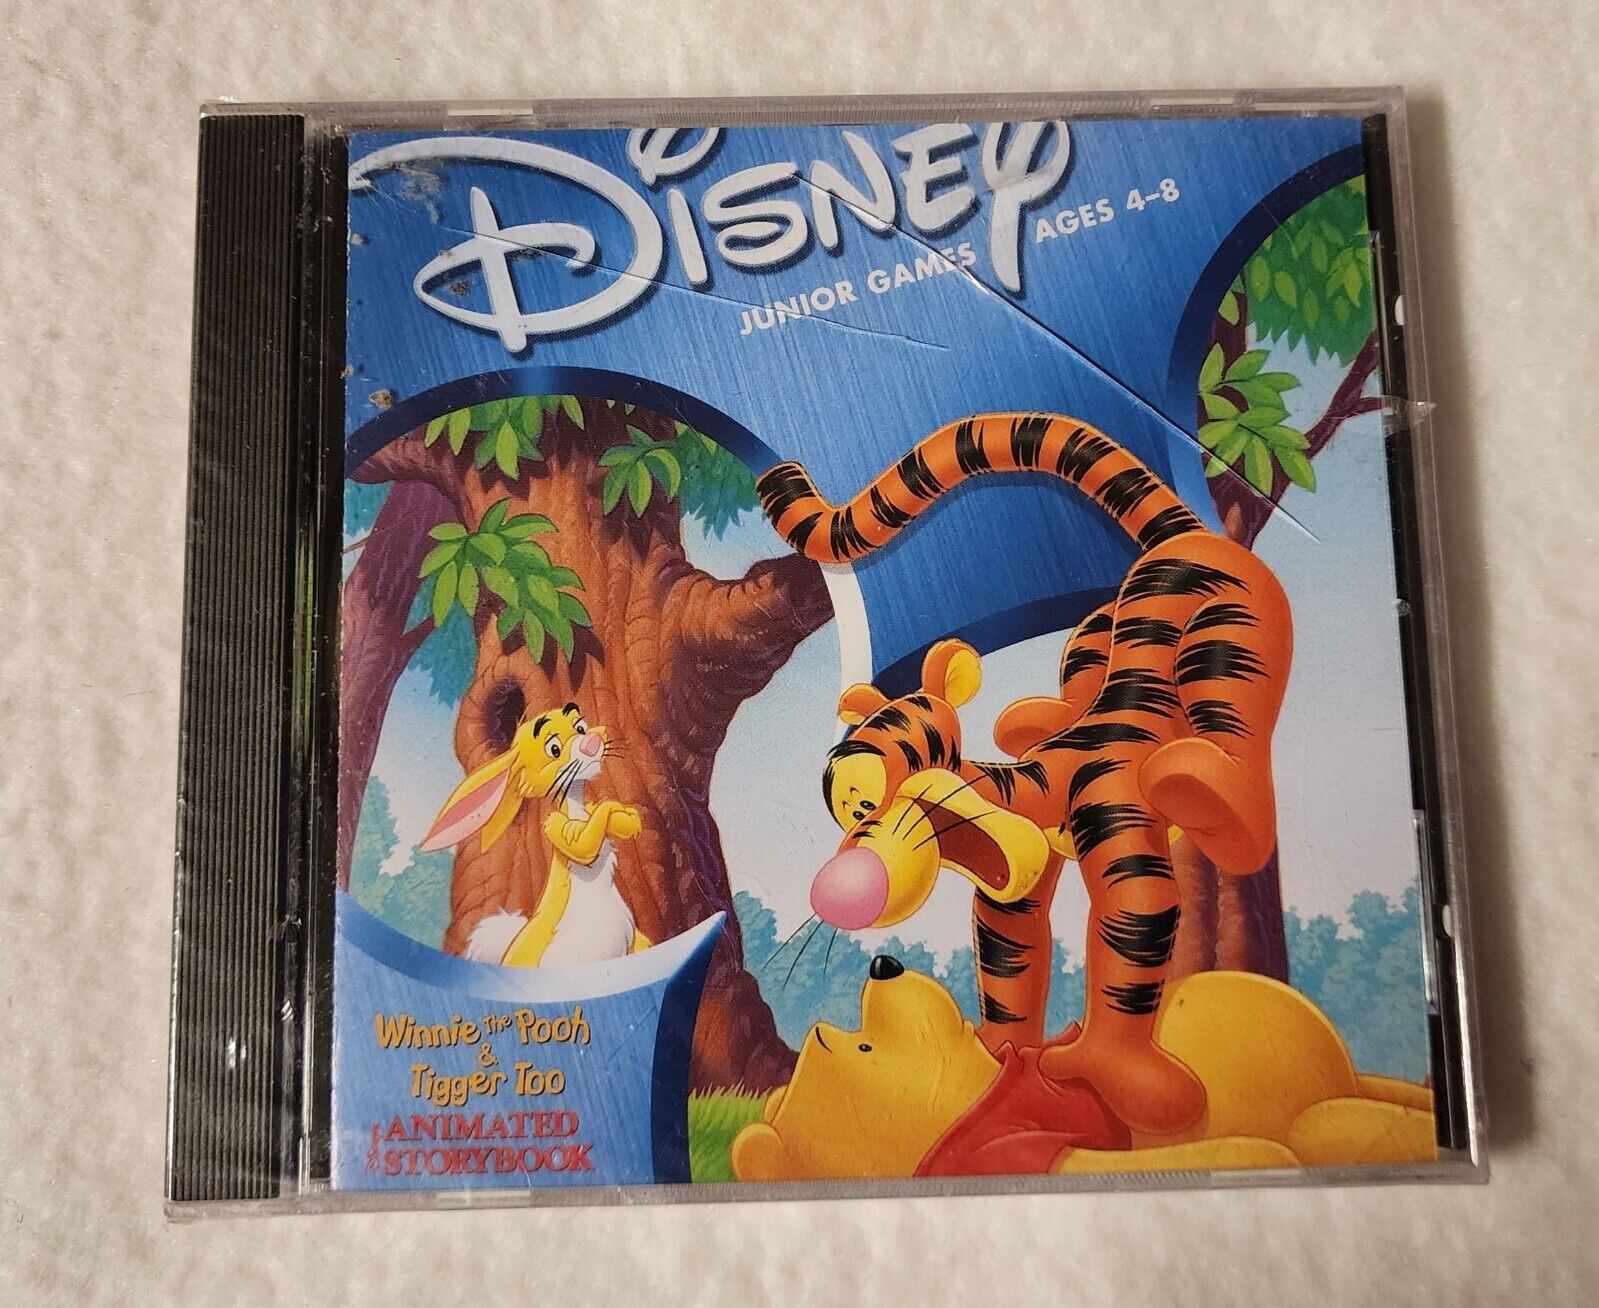 Winnie the Pooh Tigger Too Animated Storybook PC CD ROM Junior Games Disney NEW